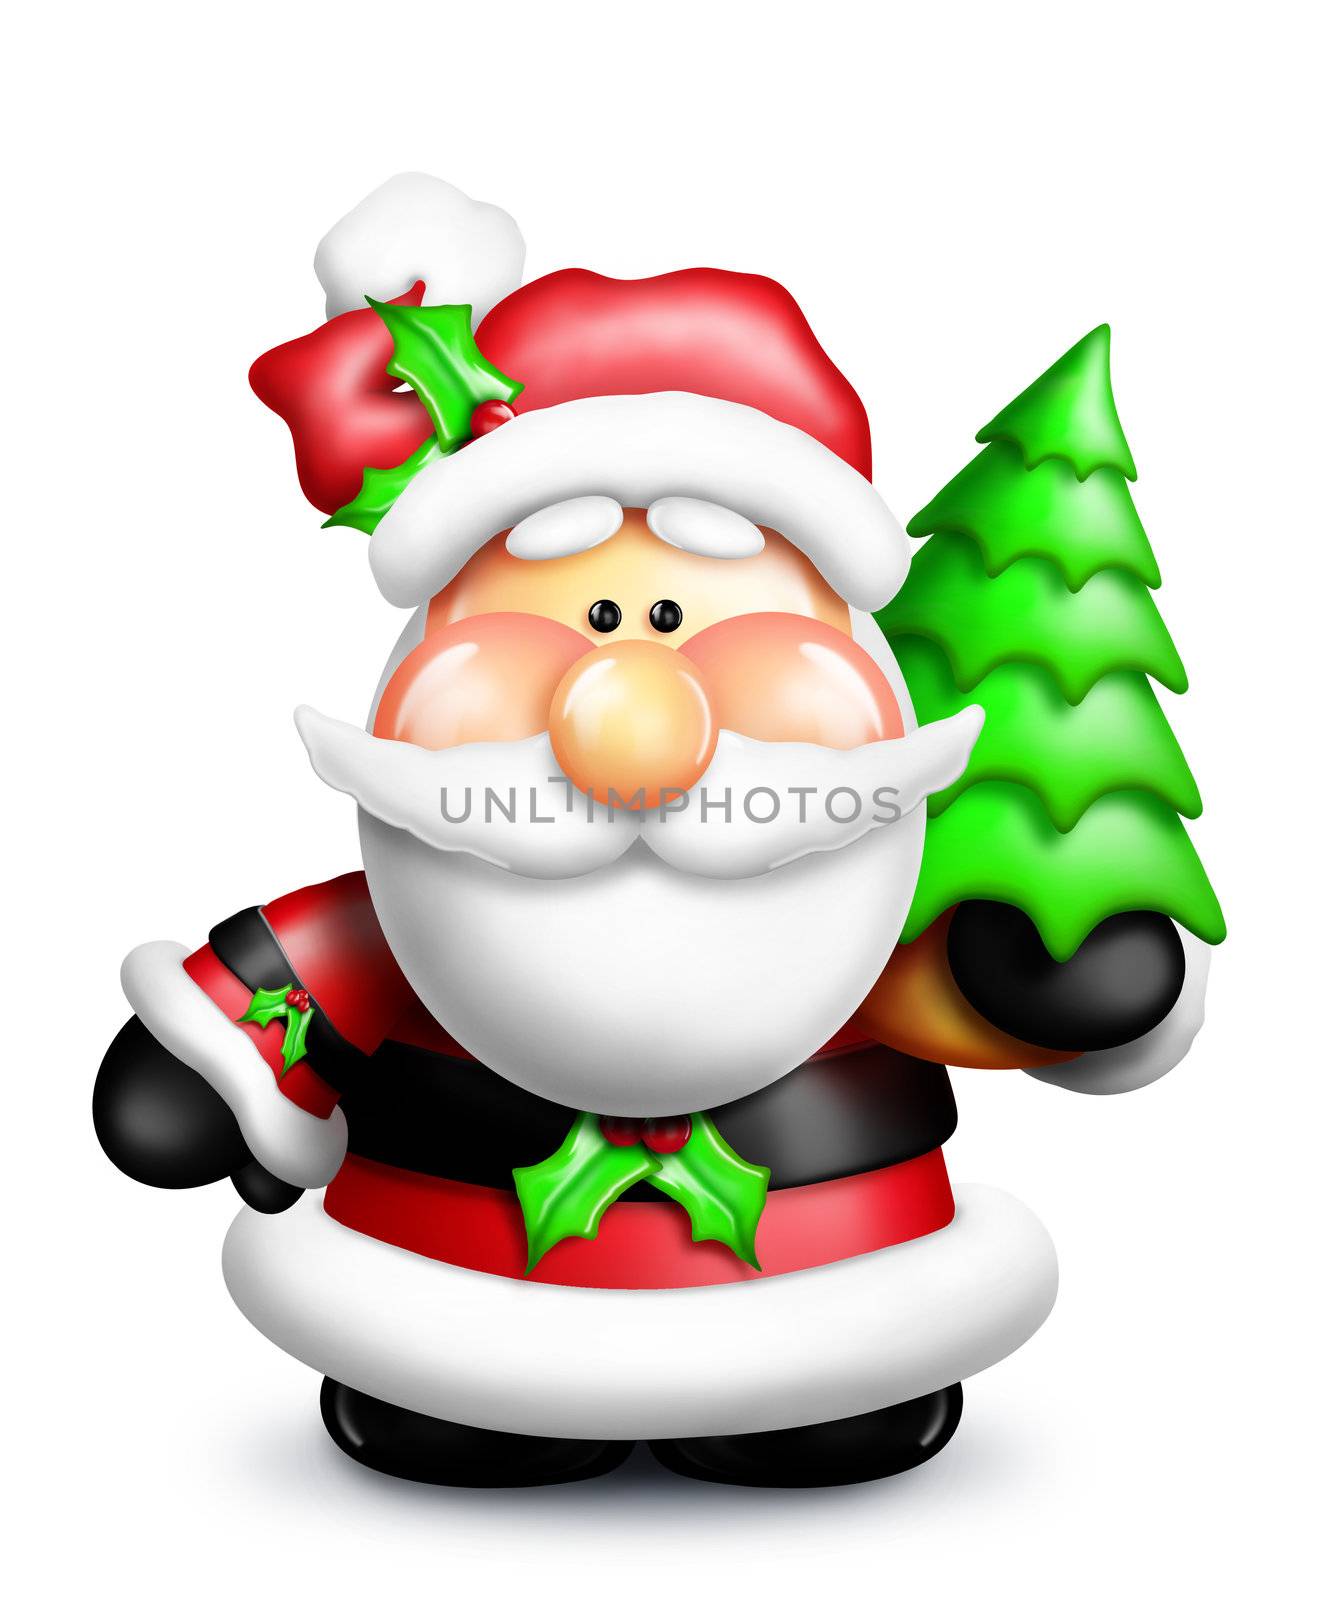 An adorable digitl illustration of a classic Santa Claus holding a Christmas tree.